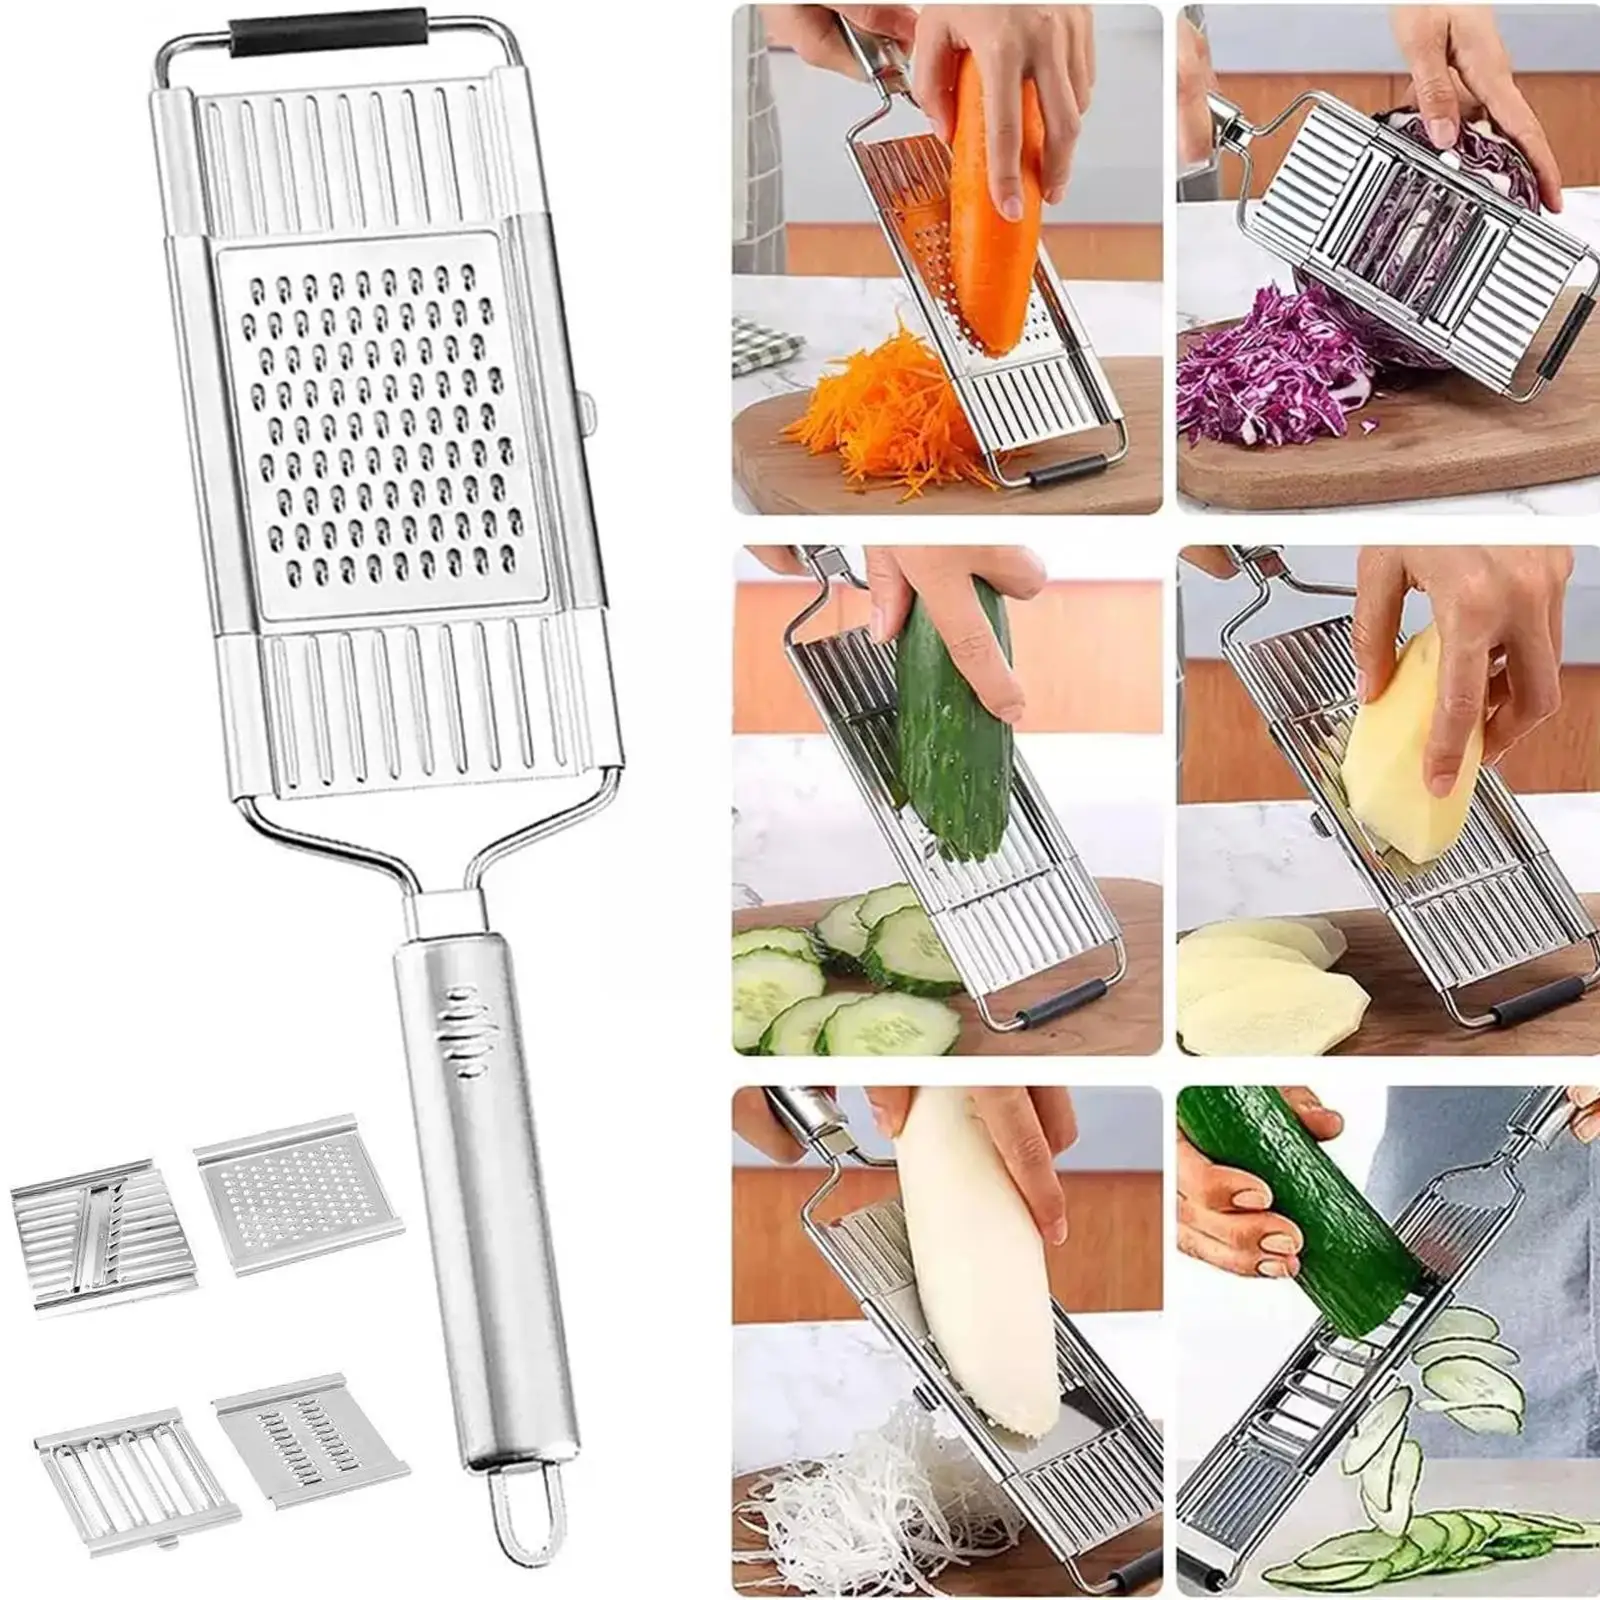 Shredder Cutter Stainless Steel Portable Manual Vegetable Grater Clean Handle Multi Easy Home Kitchen With Purpose Slicer T Y2Y5